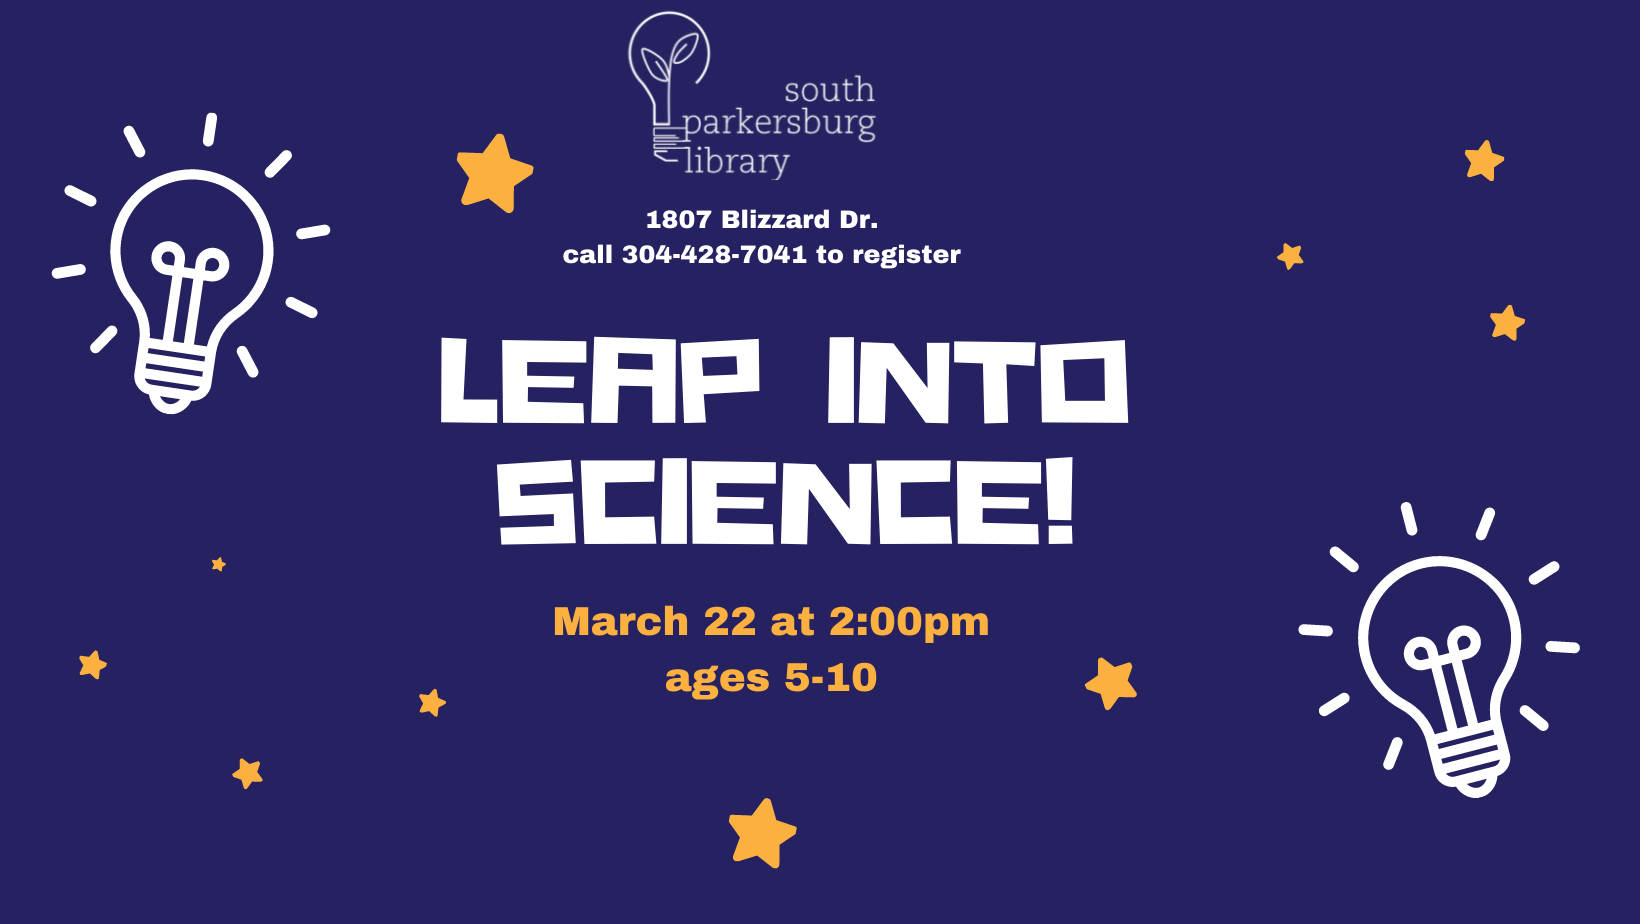 Leap Into Science! at South Parkersburg